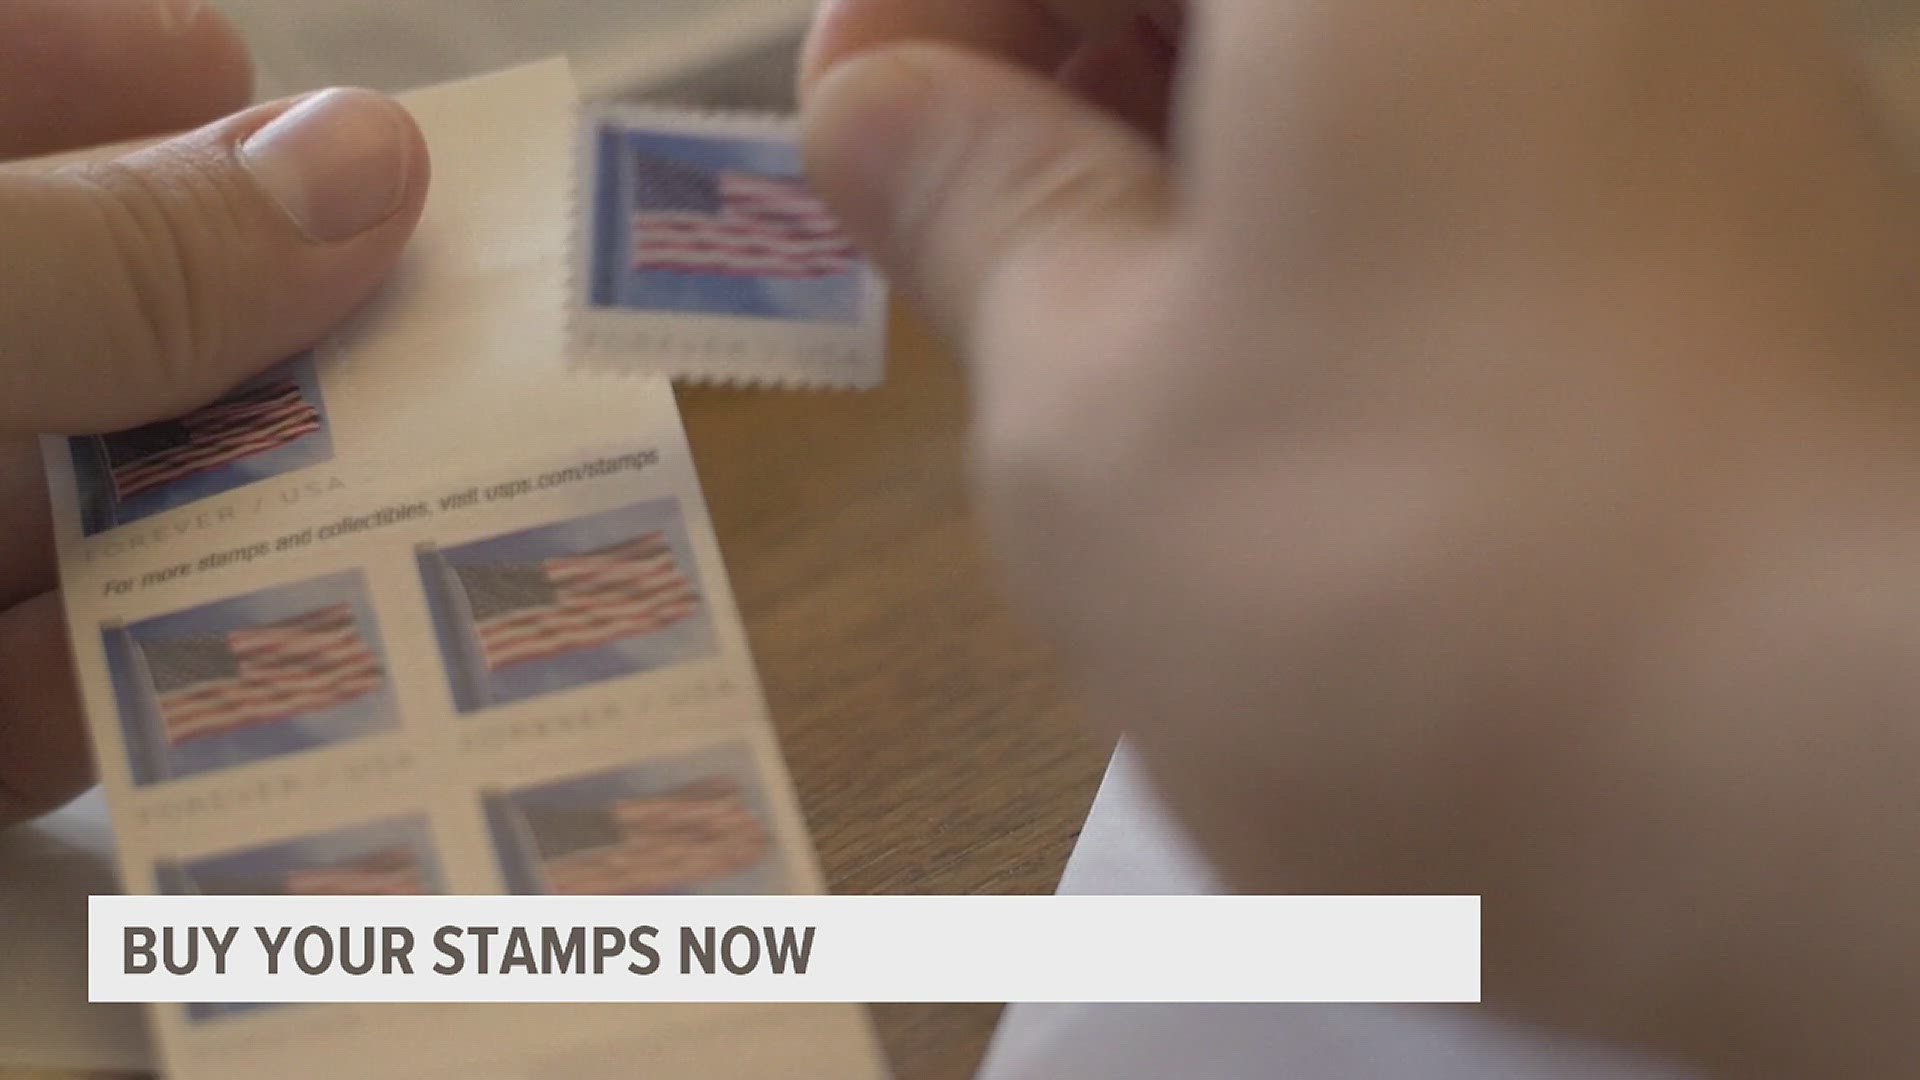 LAST CHANCE to stock up on postage stamps before the January price